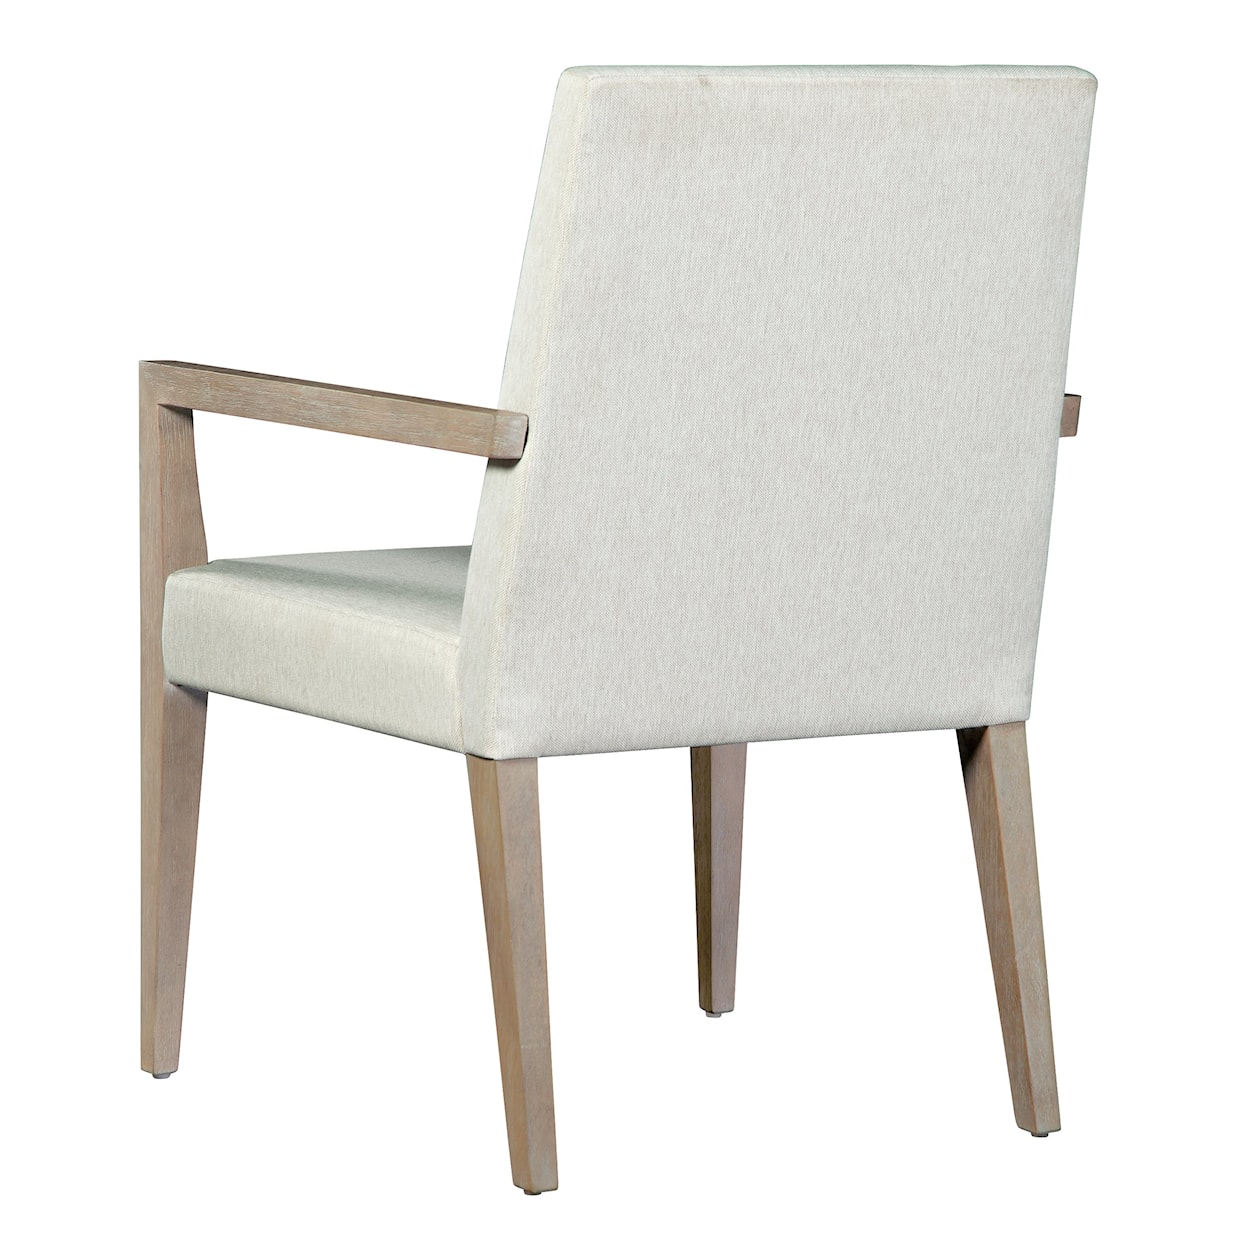 Hekman Scottsdale Upholstered Dining Arm Chair